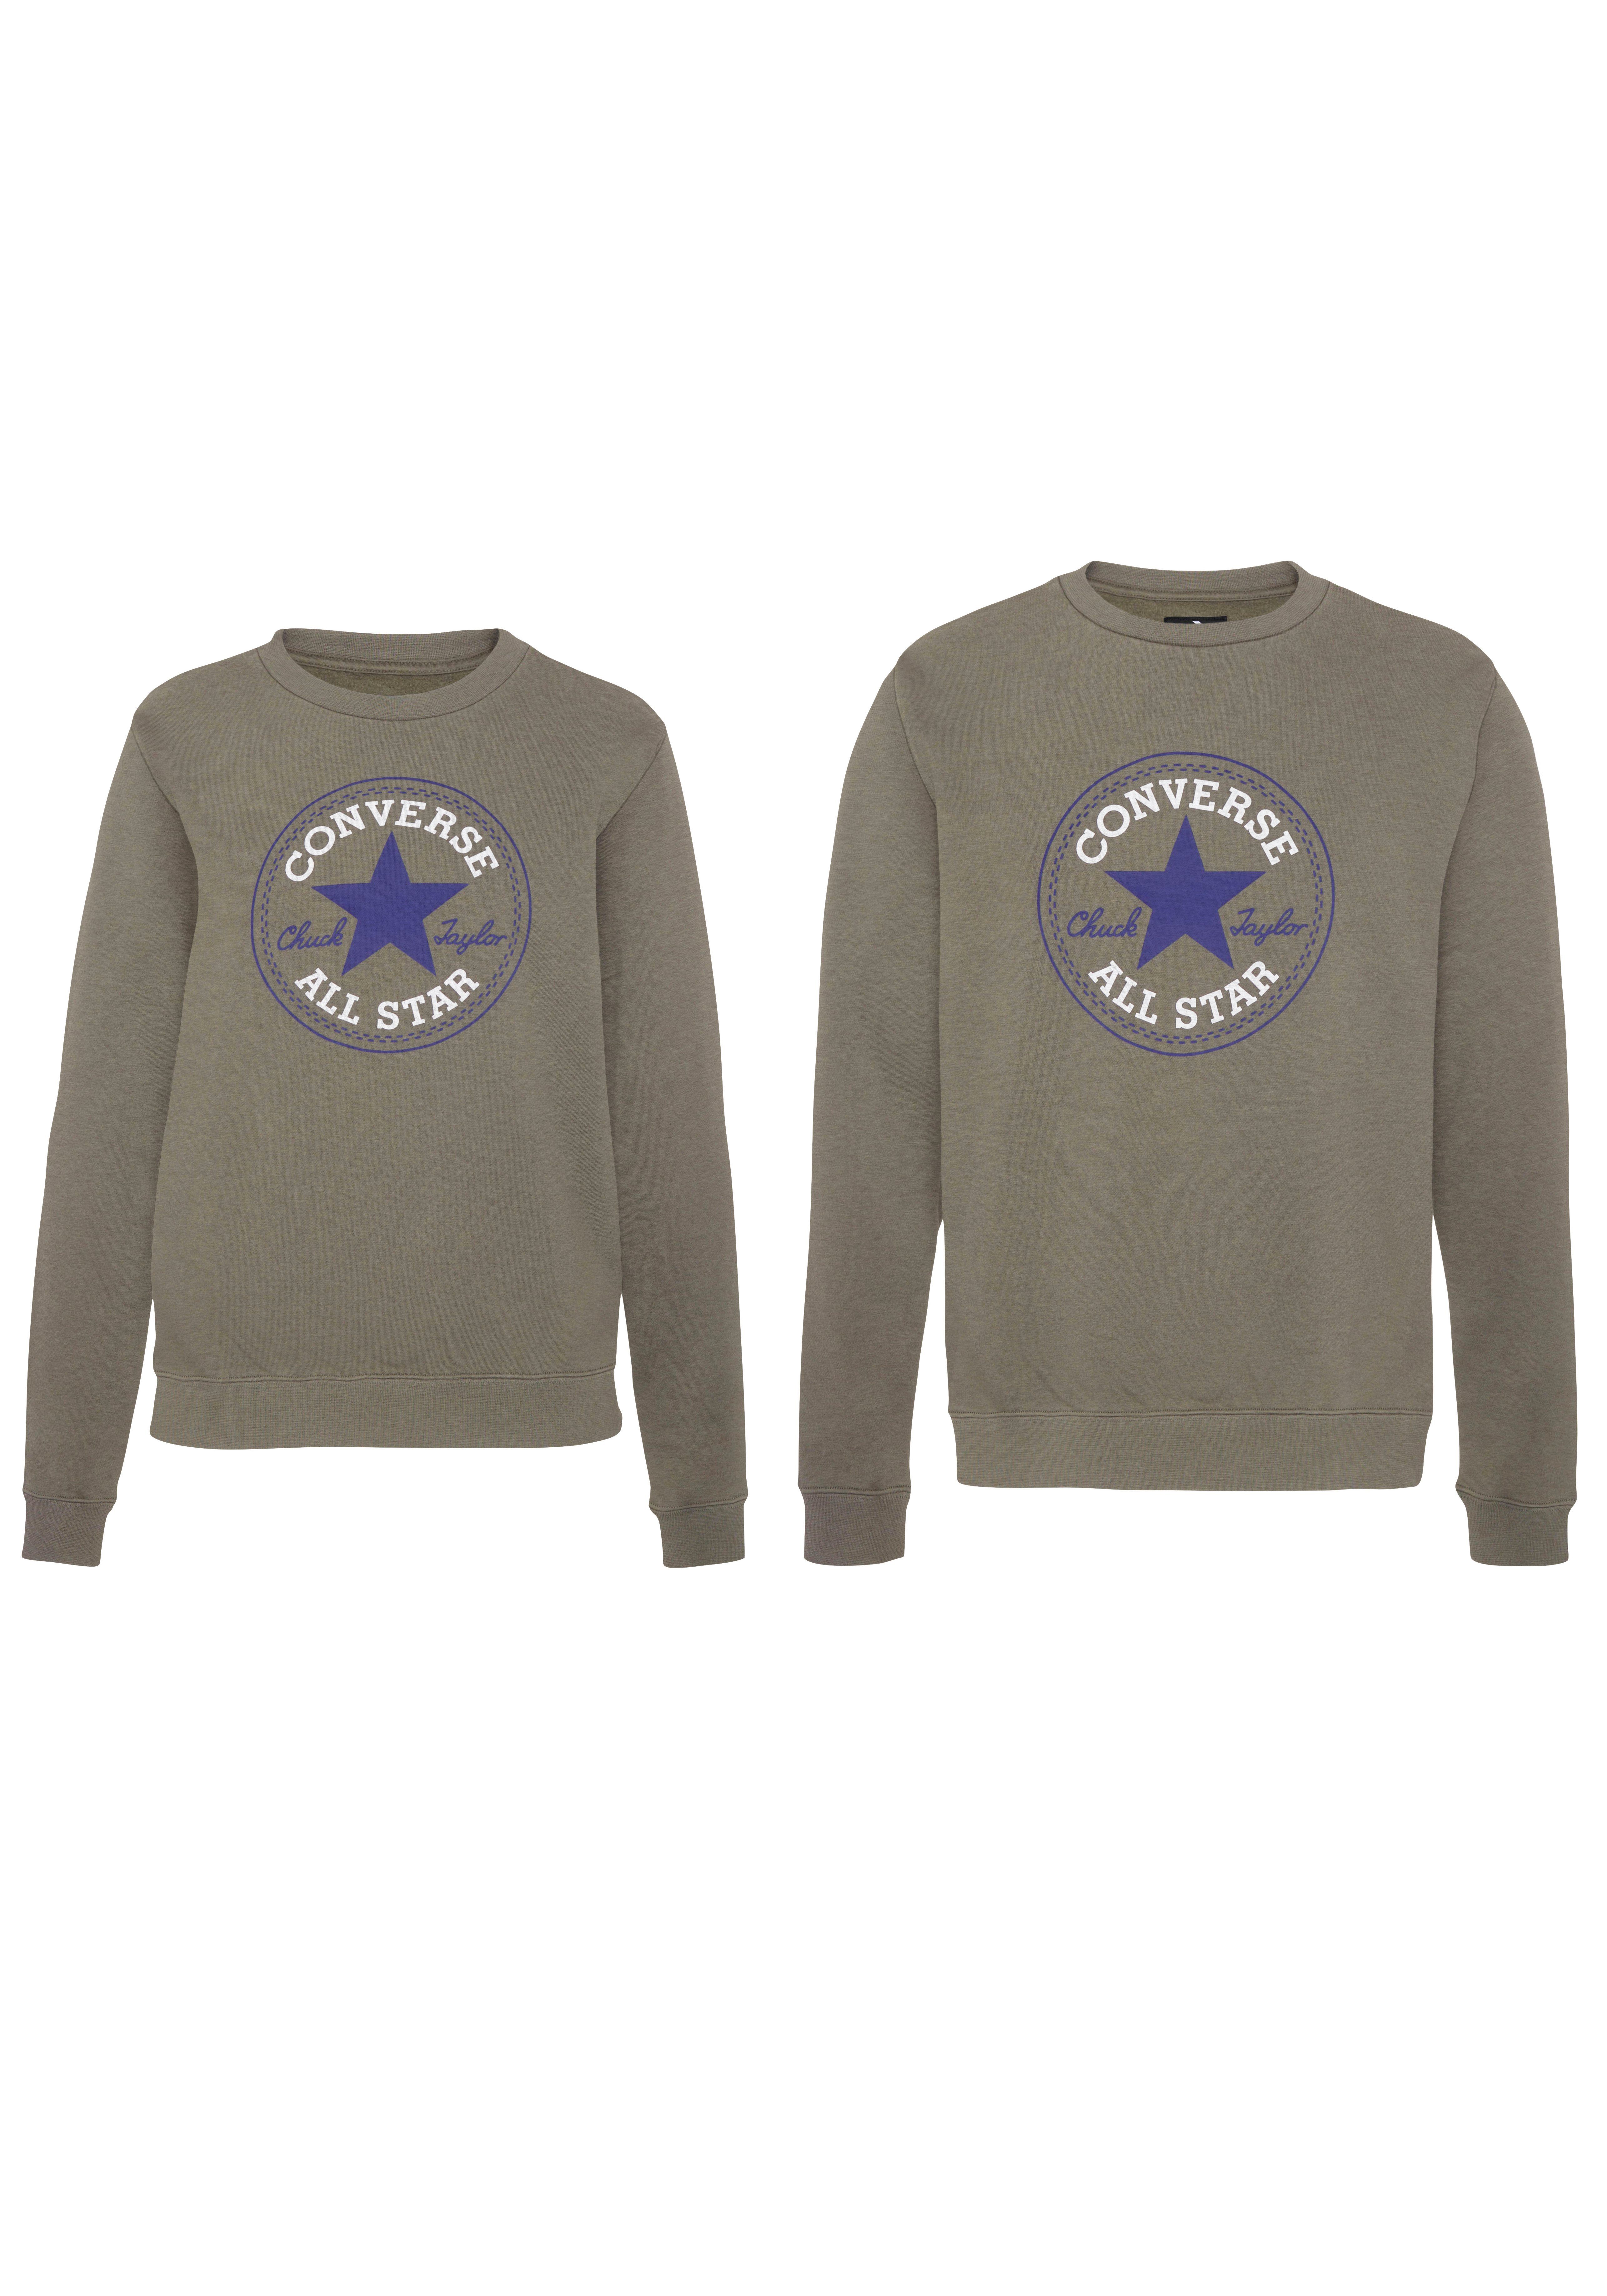 Converse Sweatshirt UNISEX ALL BRUSHED STAR olive PATCH BACK